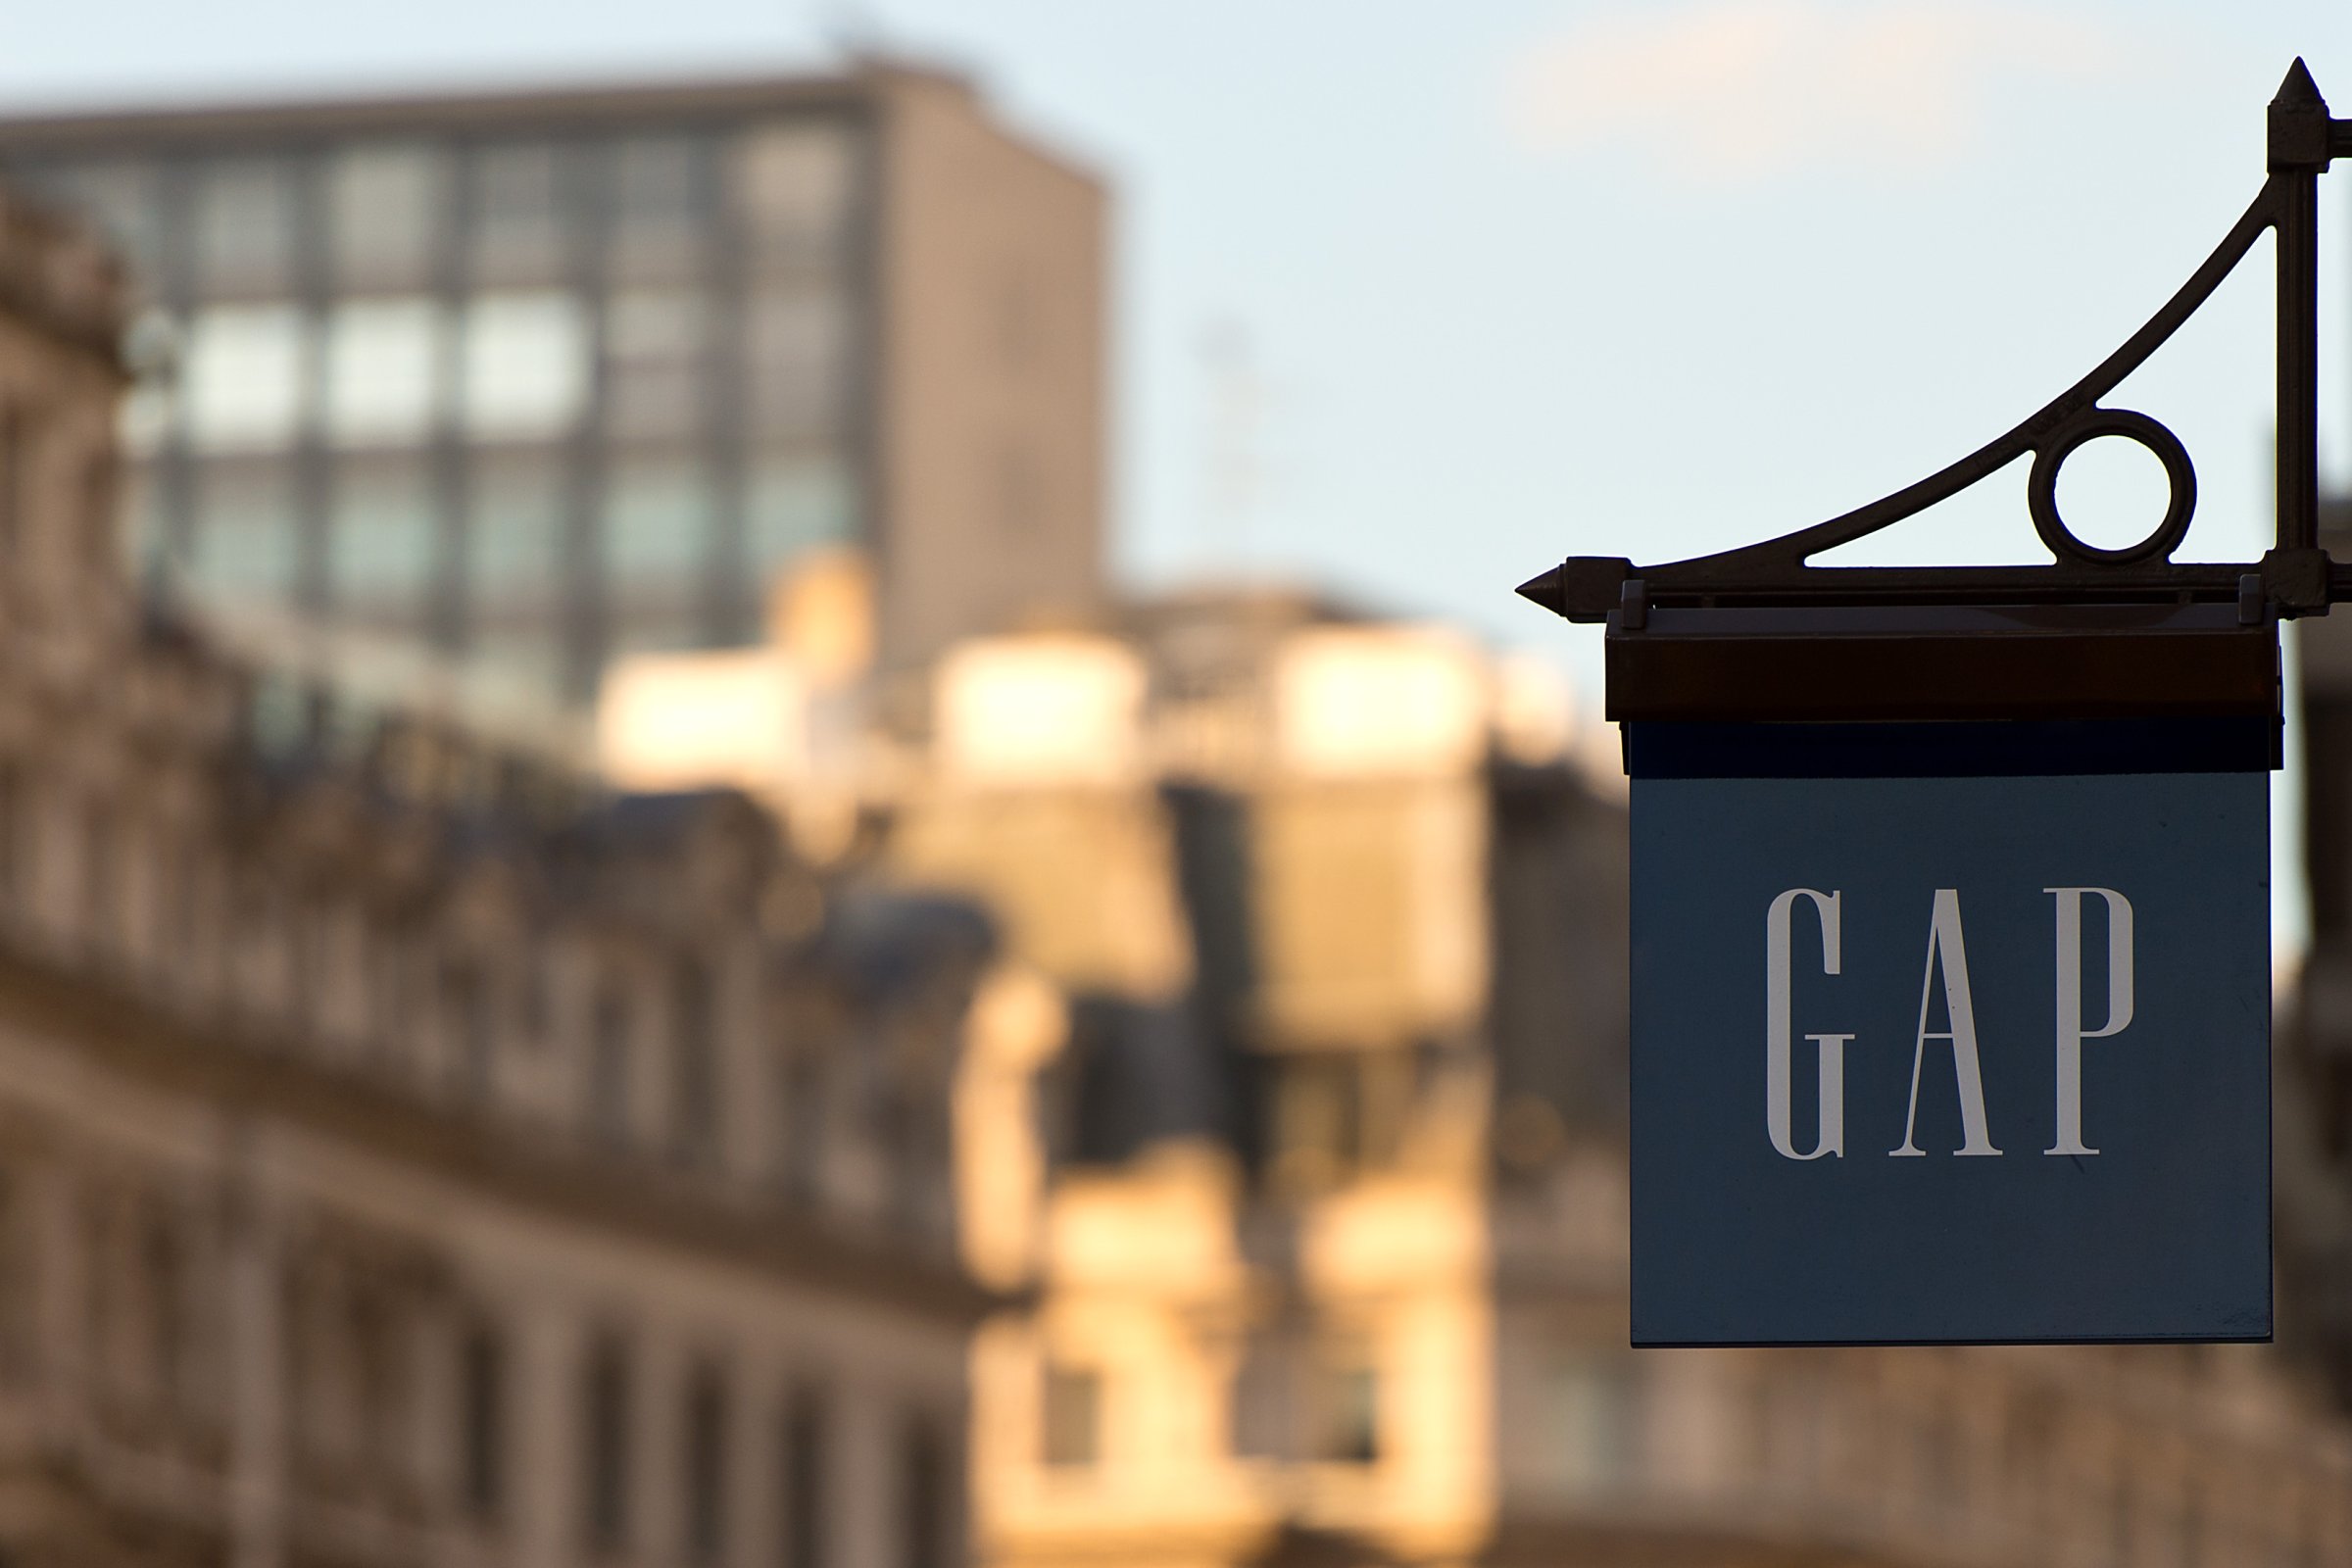 Fashion Store Gap Are The Latest American Company Facing British Tax Questions